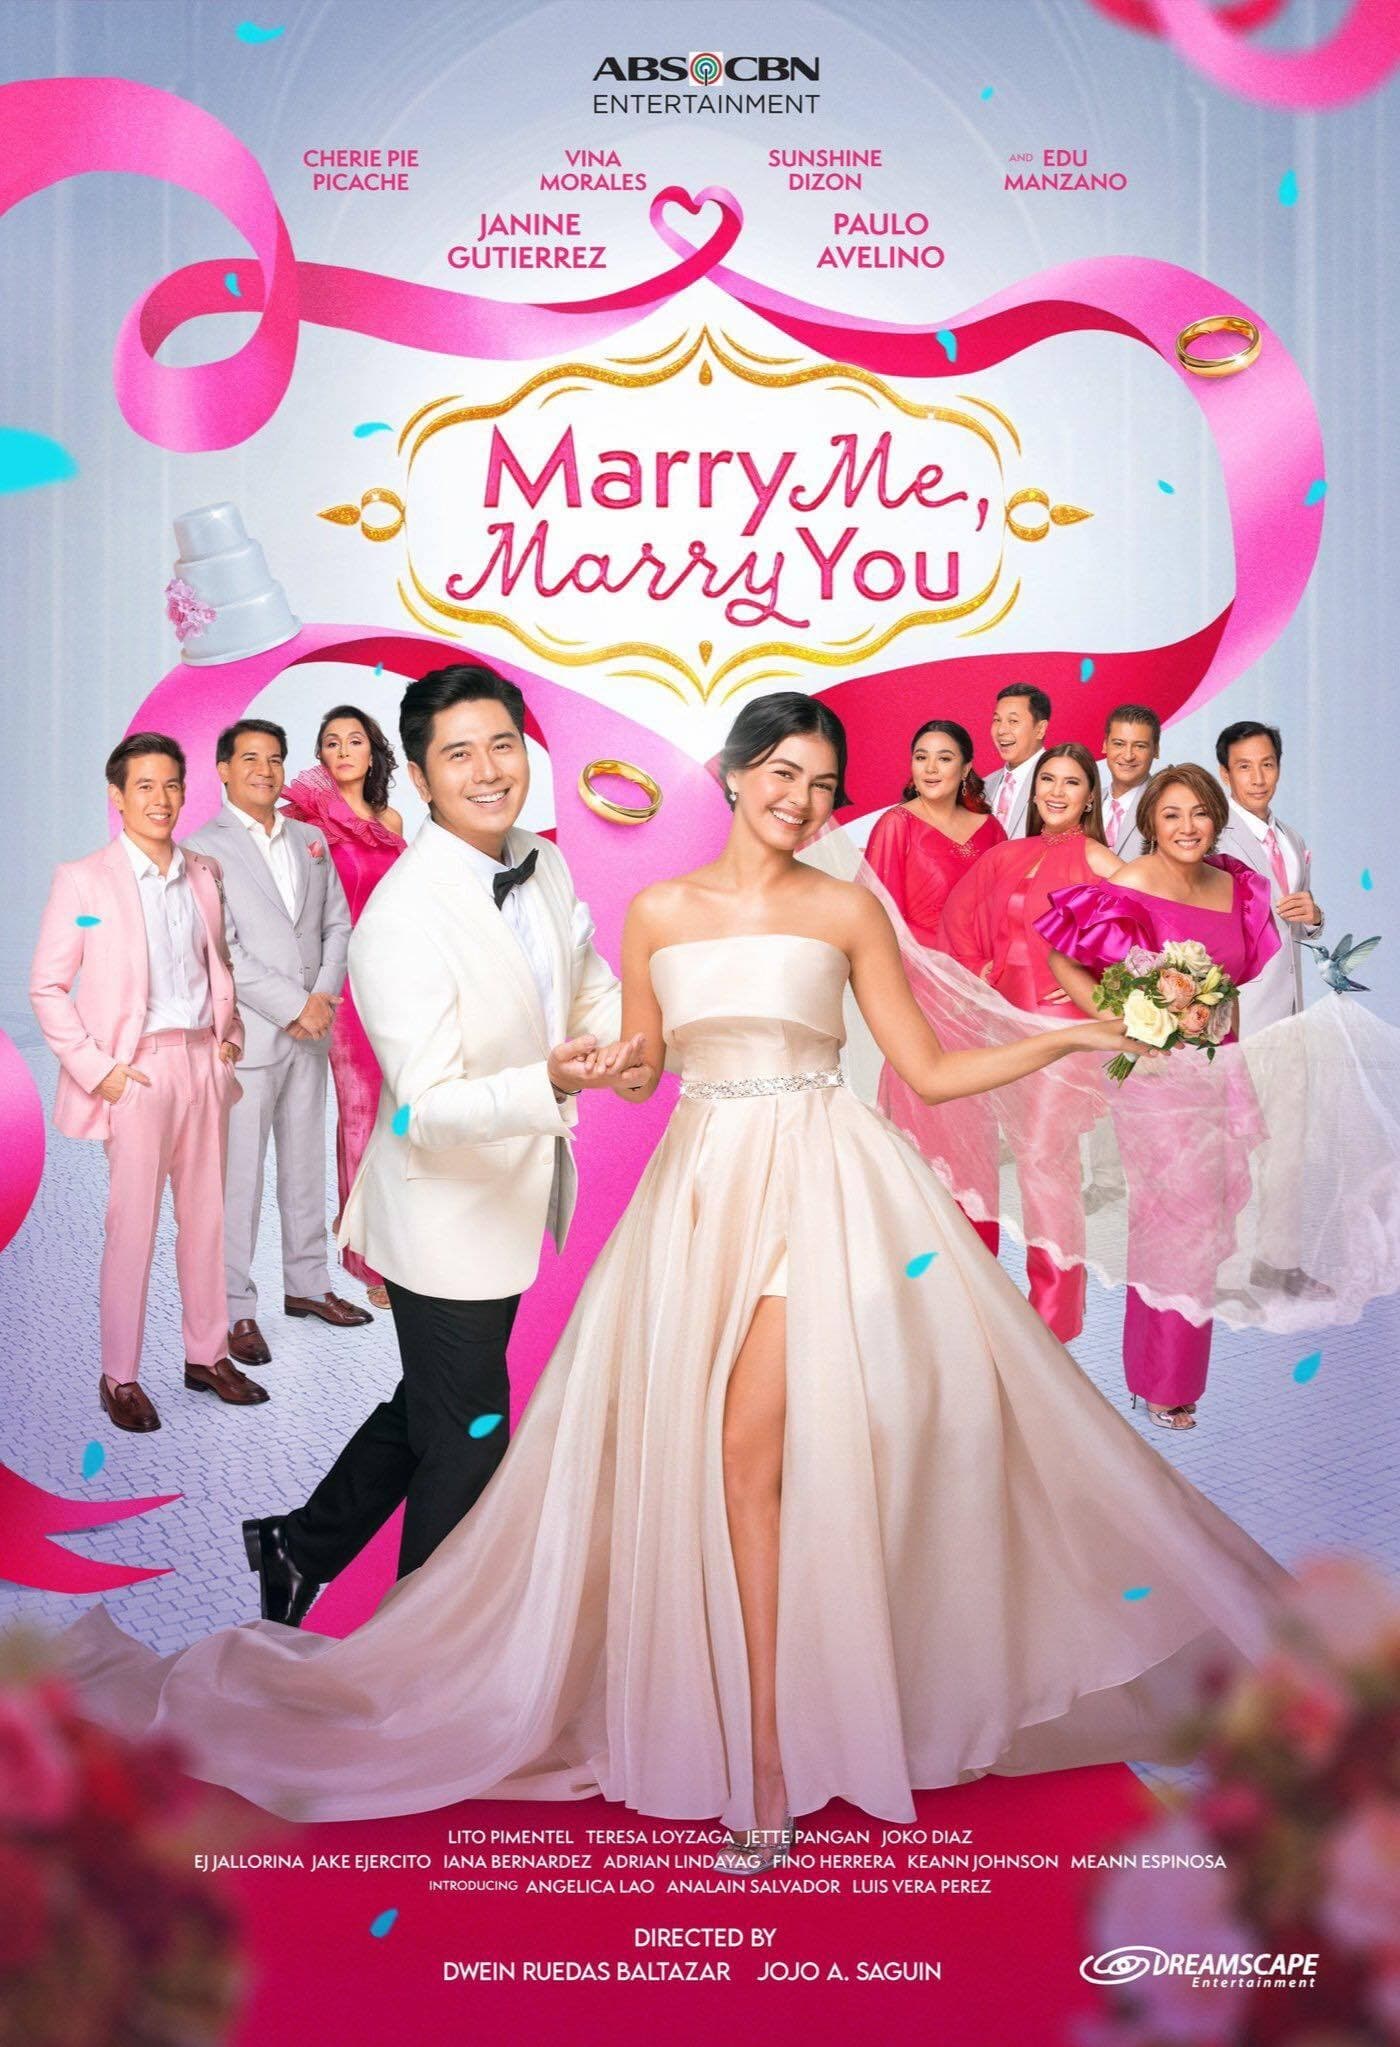 Marry Me, Marry You TV Shows About Triangle